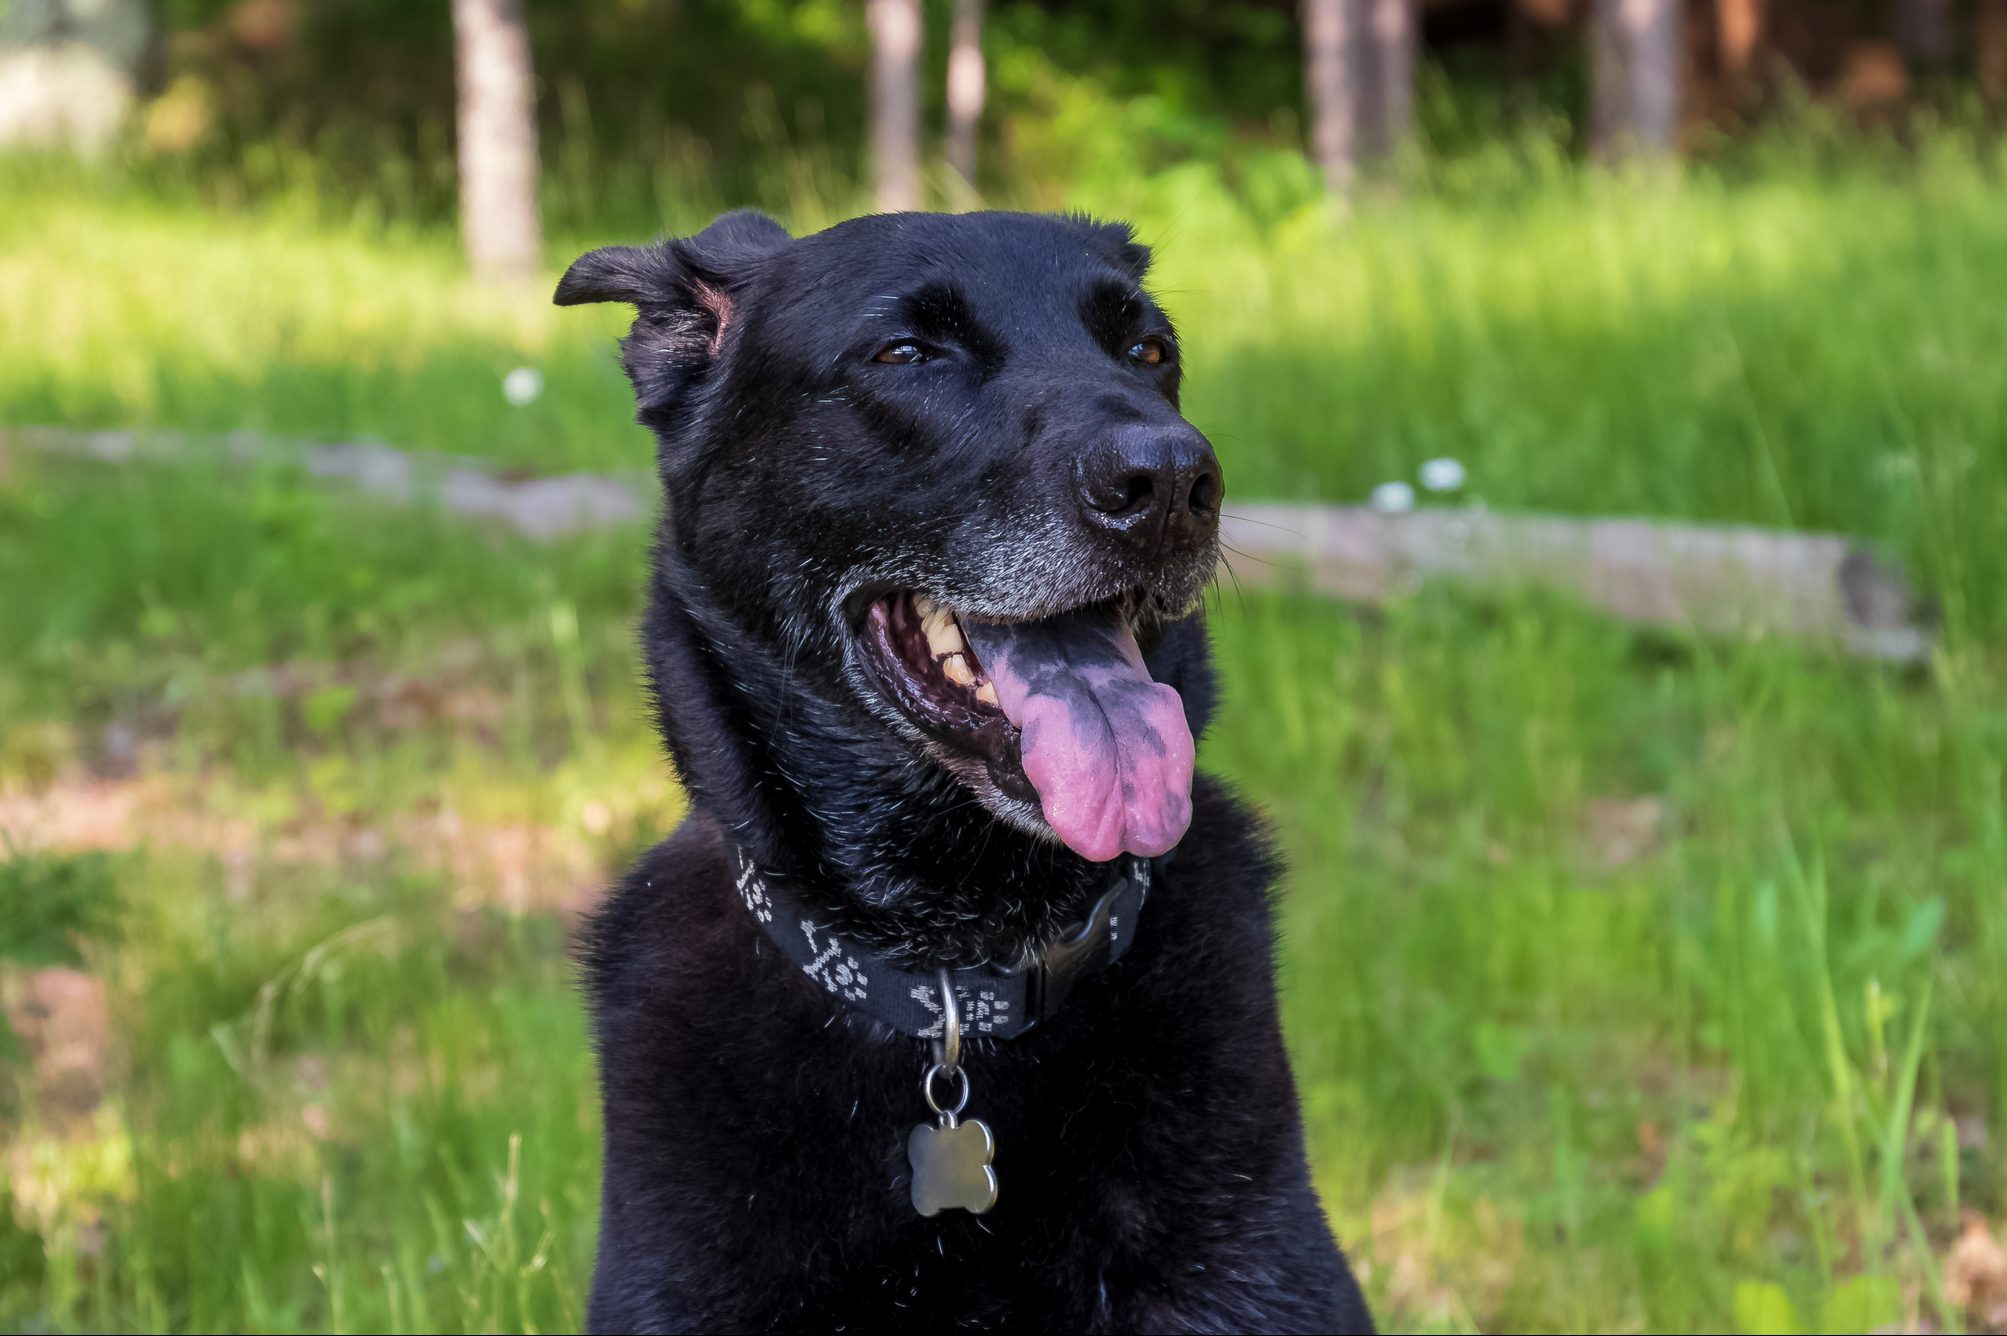 Aging black shepherd mixed breed dog looking happy with speckled tongue out